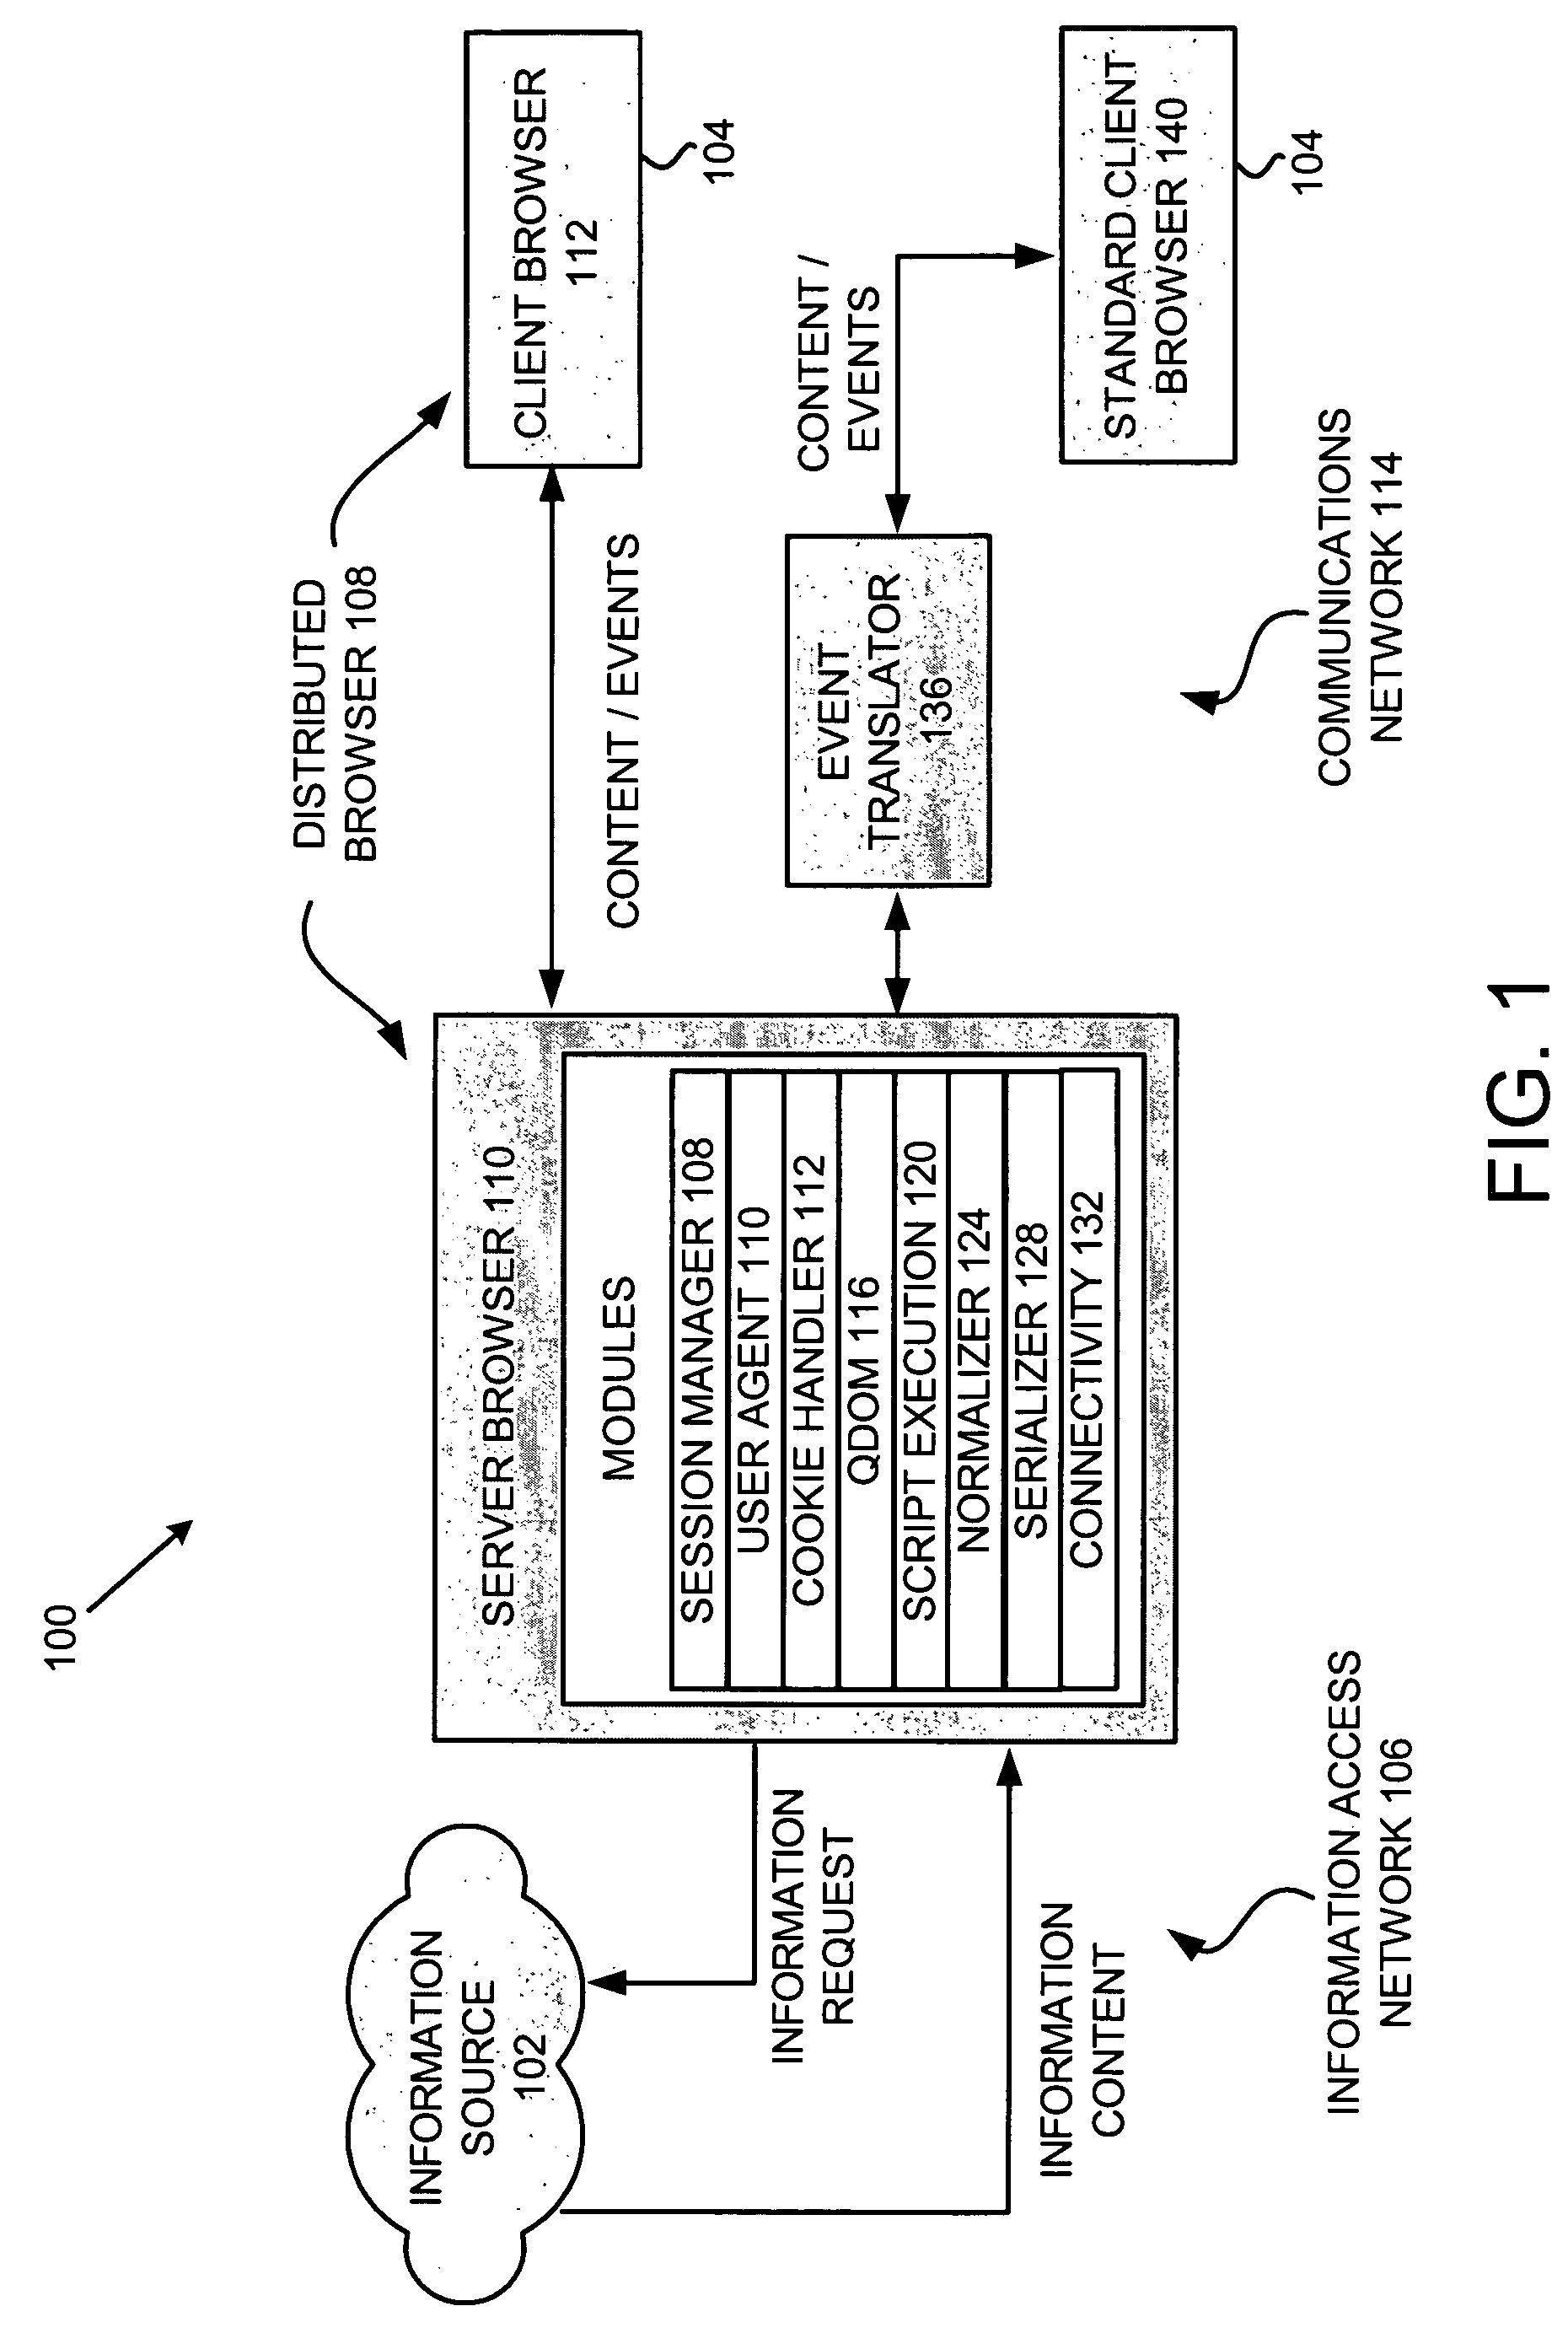 System and method for providing and displaying information content